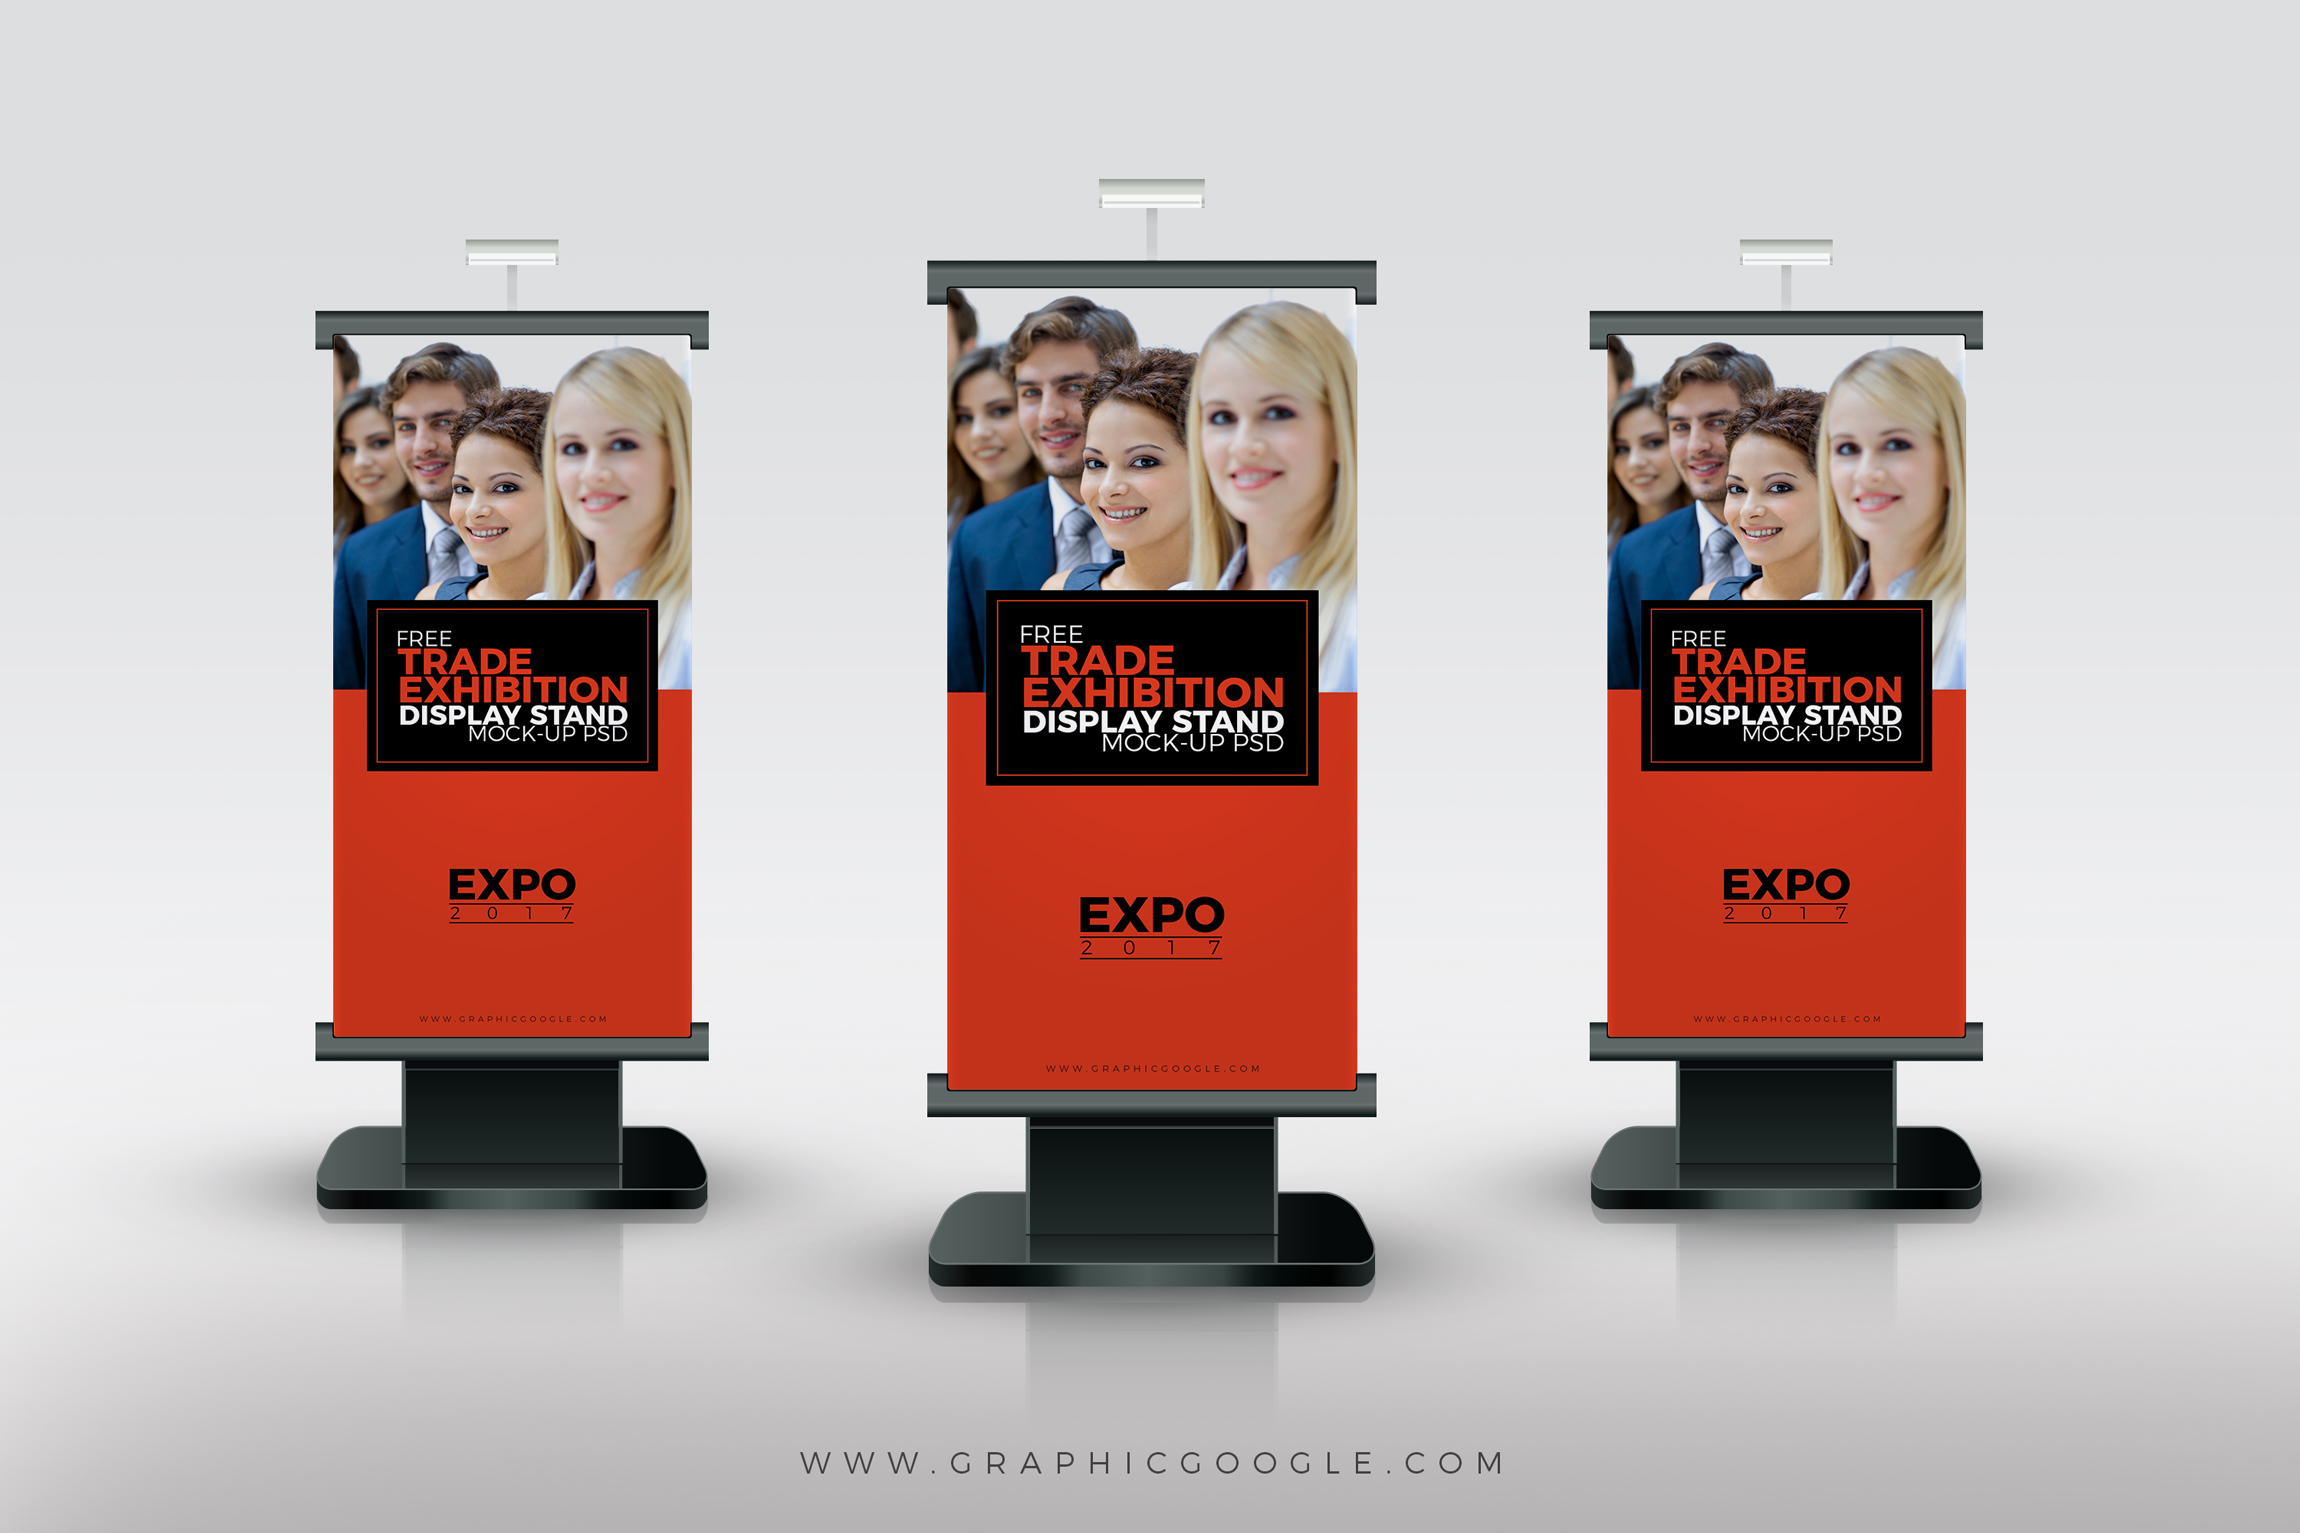 Download Free Trade Exhibition Display Stand Mock-up PsdGraphic ...